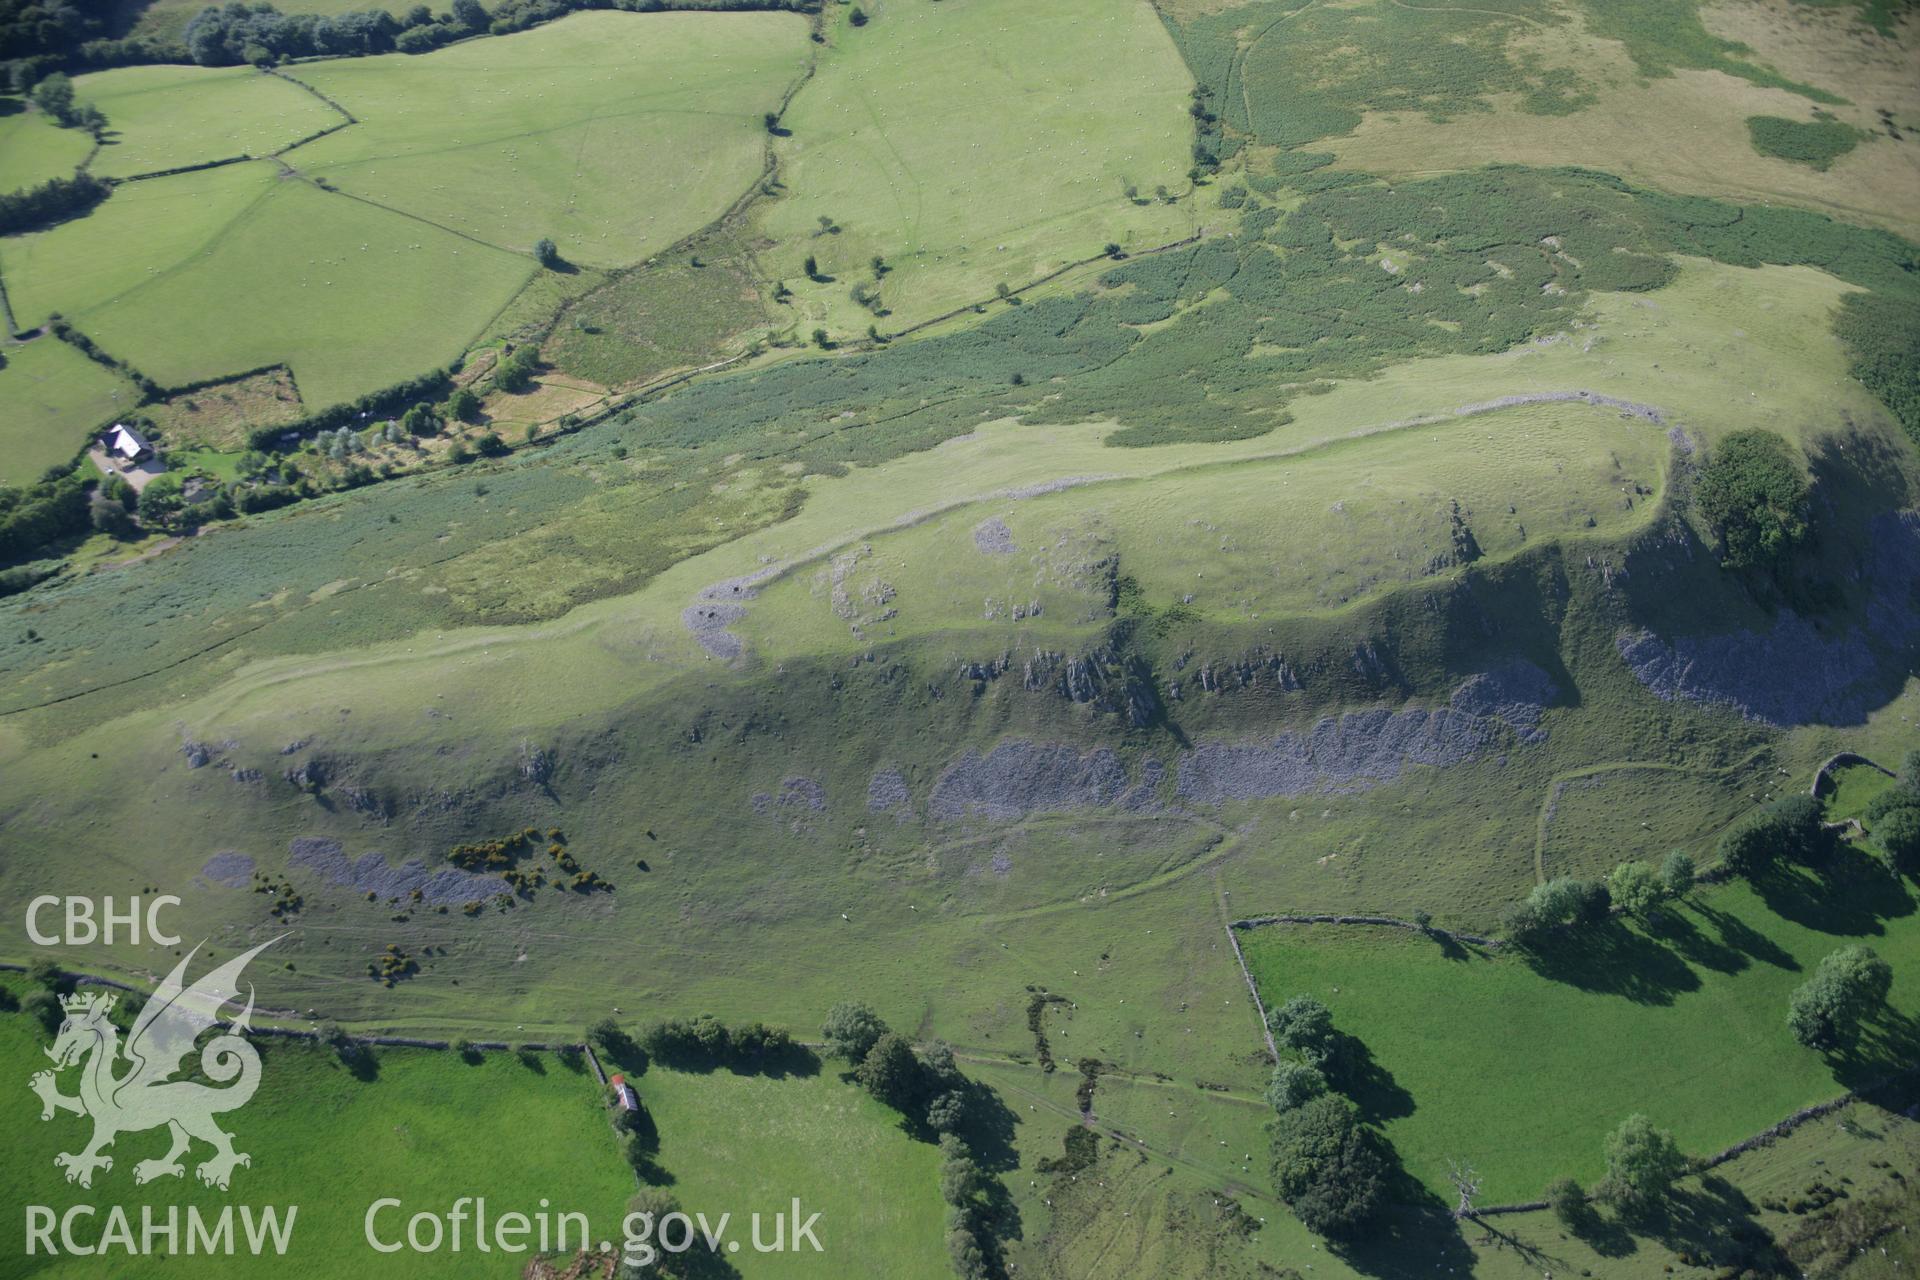 RCAHMW colour oblique aerial photograph of Castle Bank Hillfort. Taken on 08 August 2007 by Toby Driver